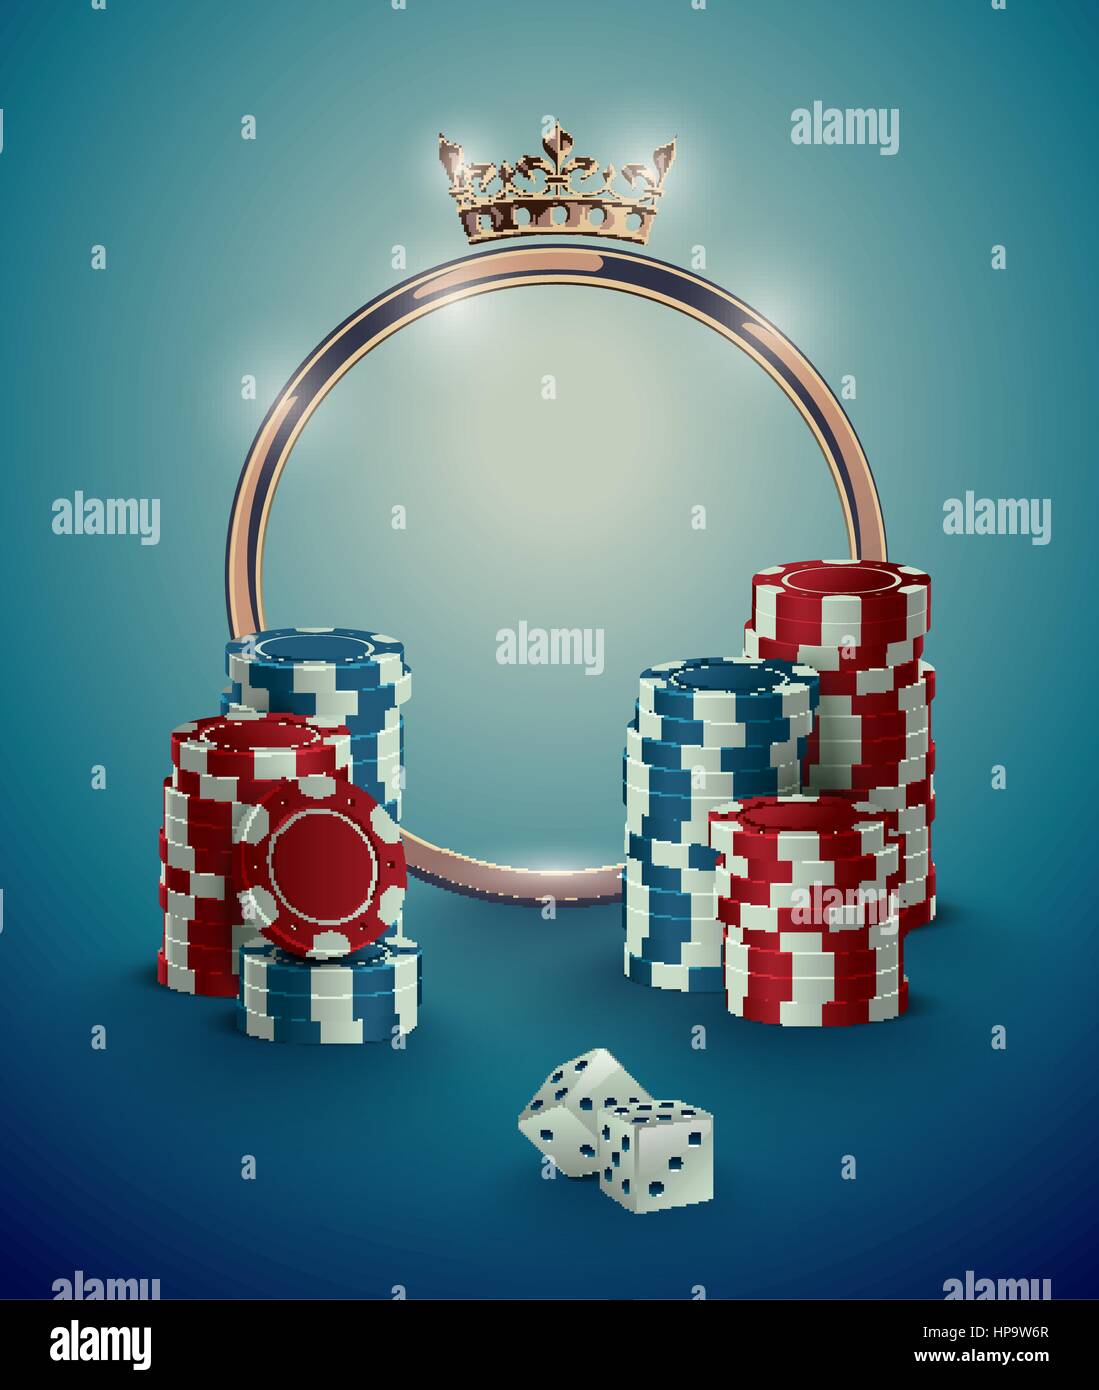 Round casino roulette golden frame with crown, stack of poker chips and white dice on deep turquoise background. Gambling online club vintage effect Stock Vector